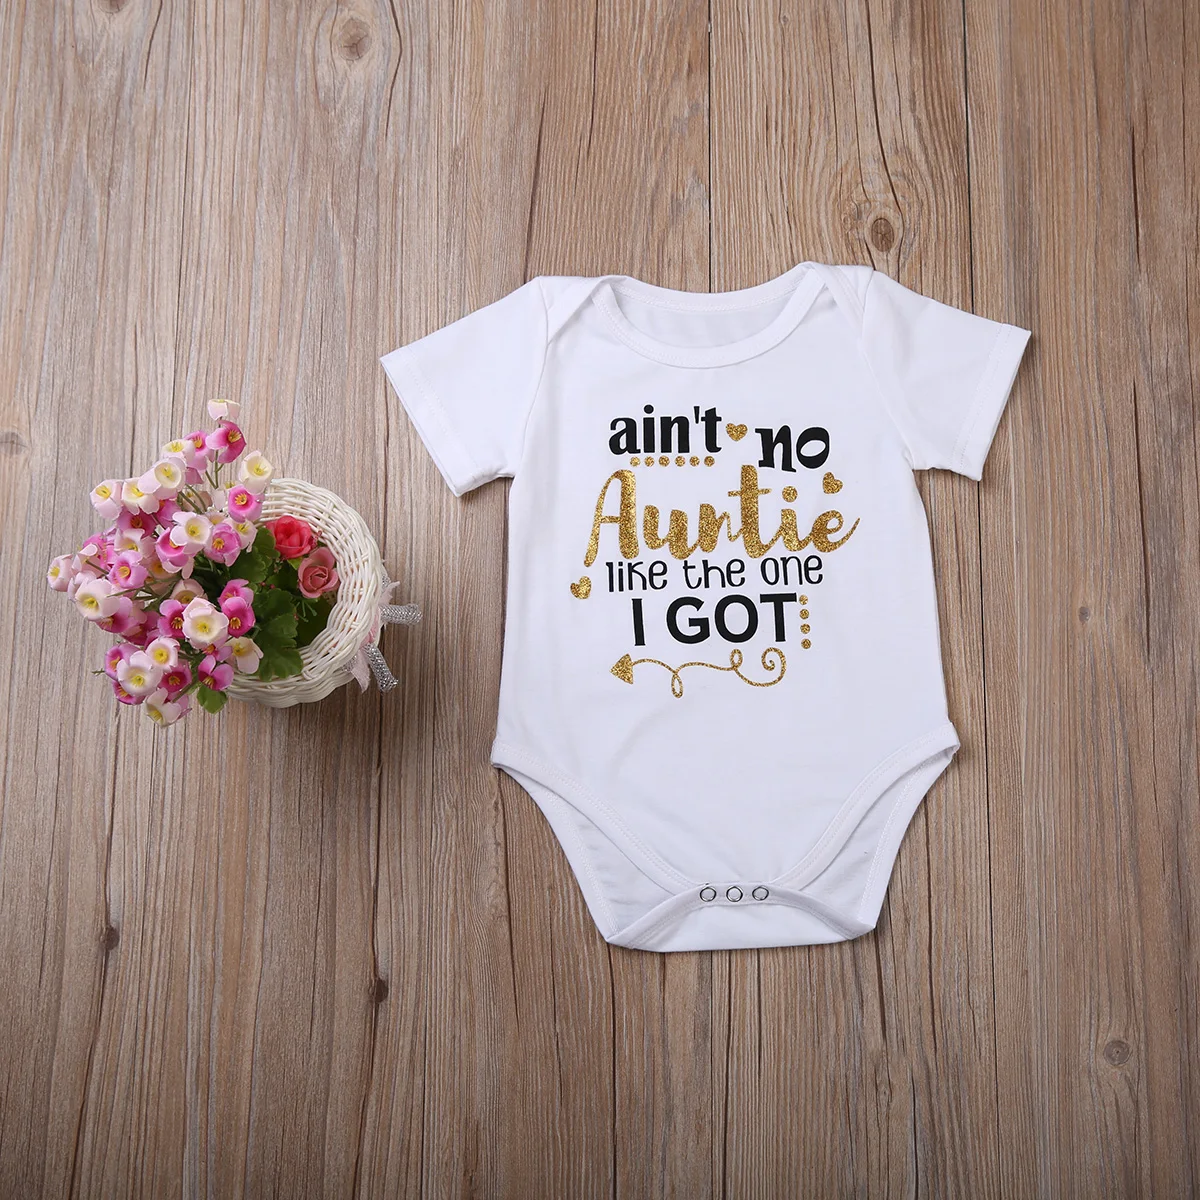 

Summer Newborn Baby Girls Boys Short Sleeve Romper Letter Printed Jumpsuit Clothes Outfits 0-18M Clothes Outfits Sunsuit